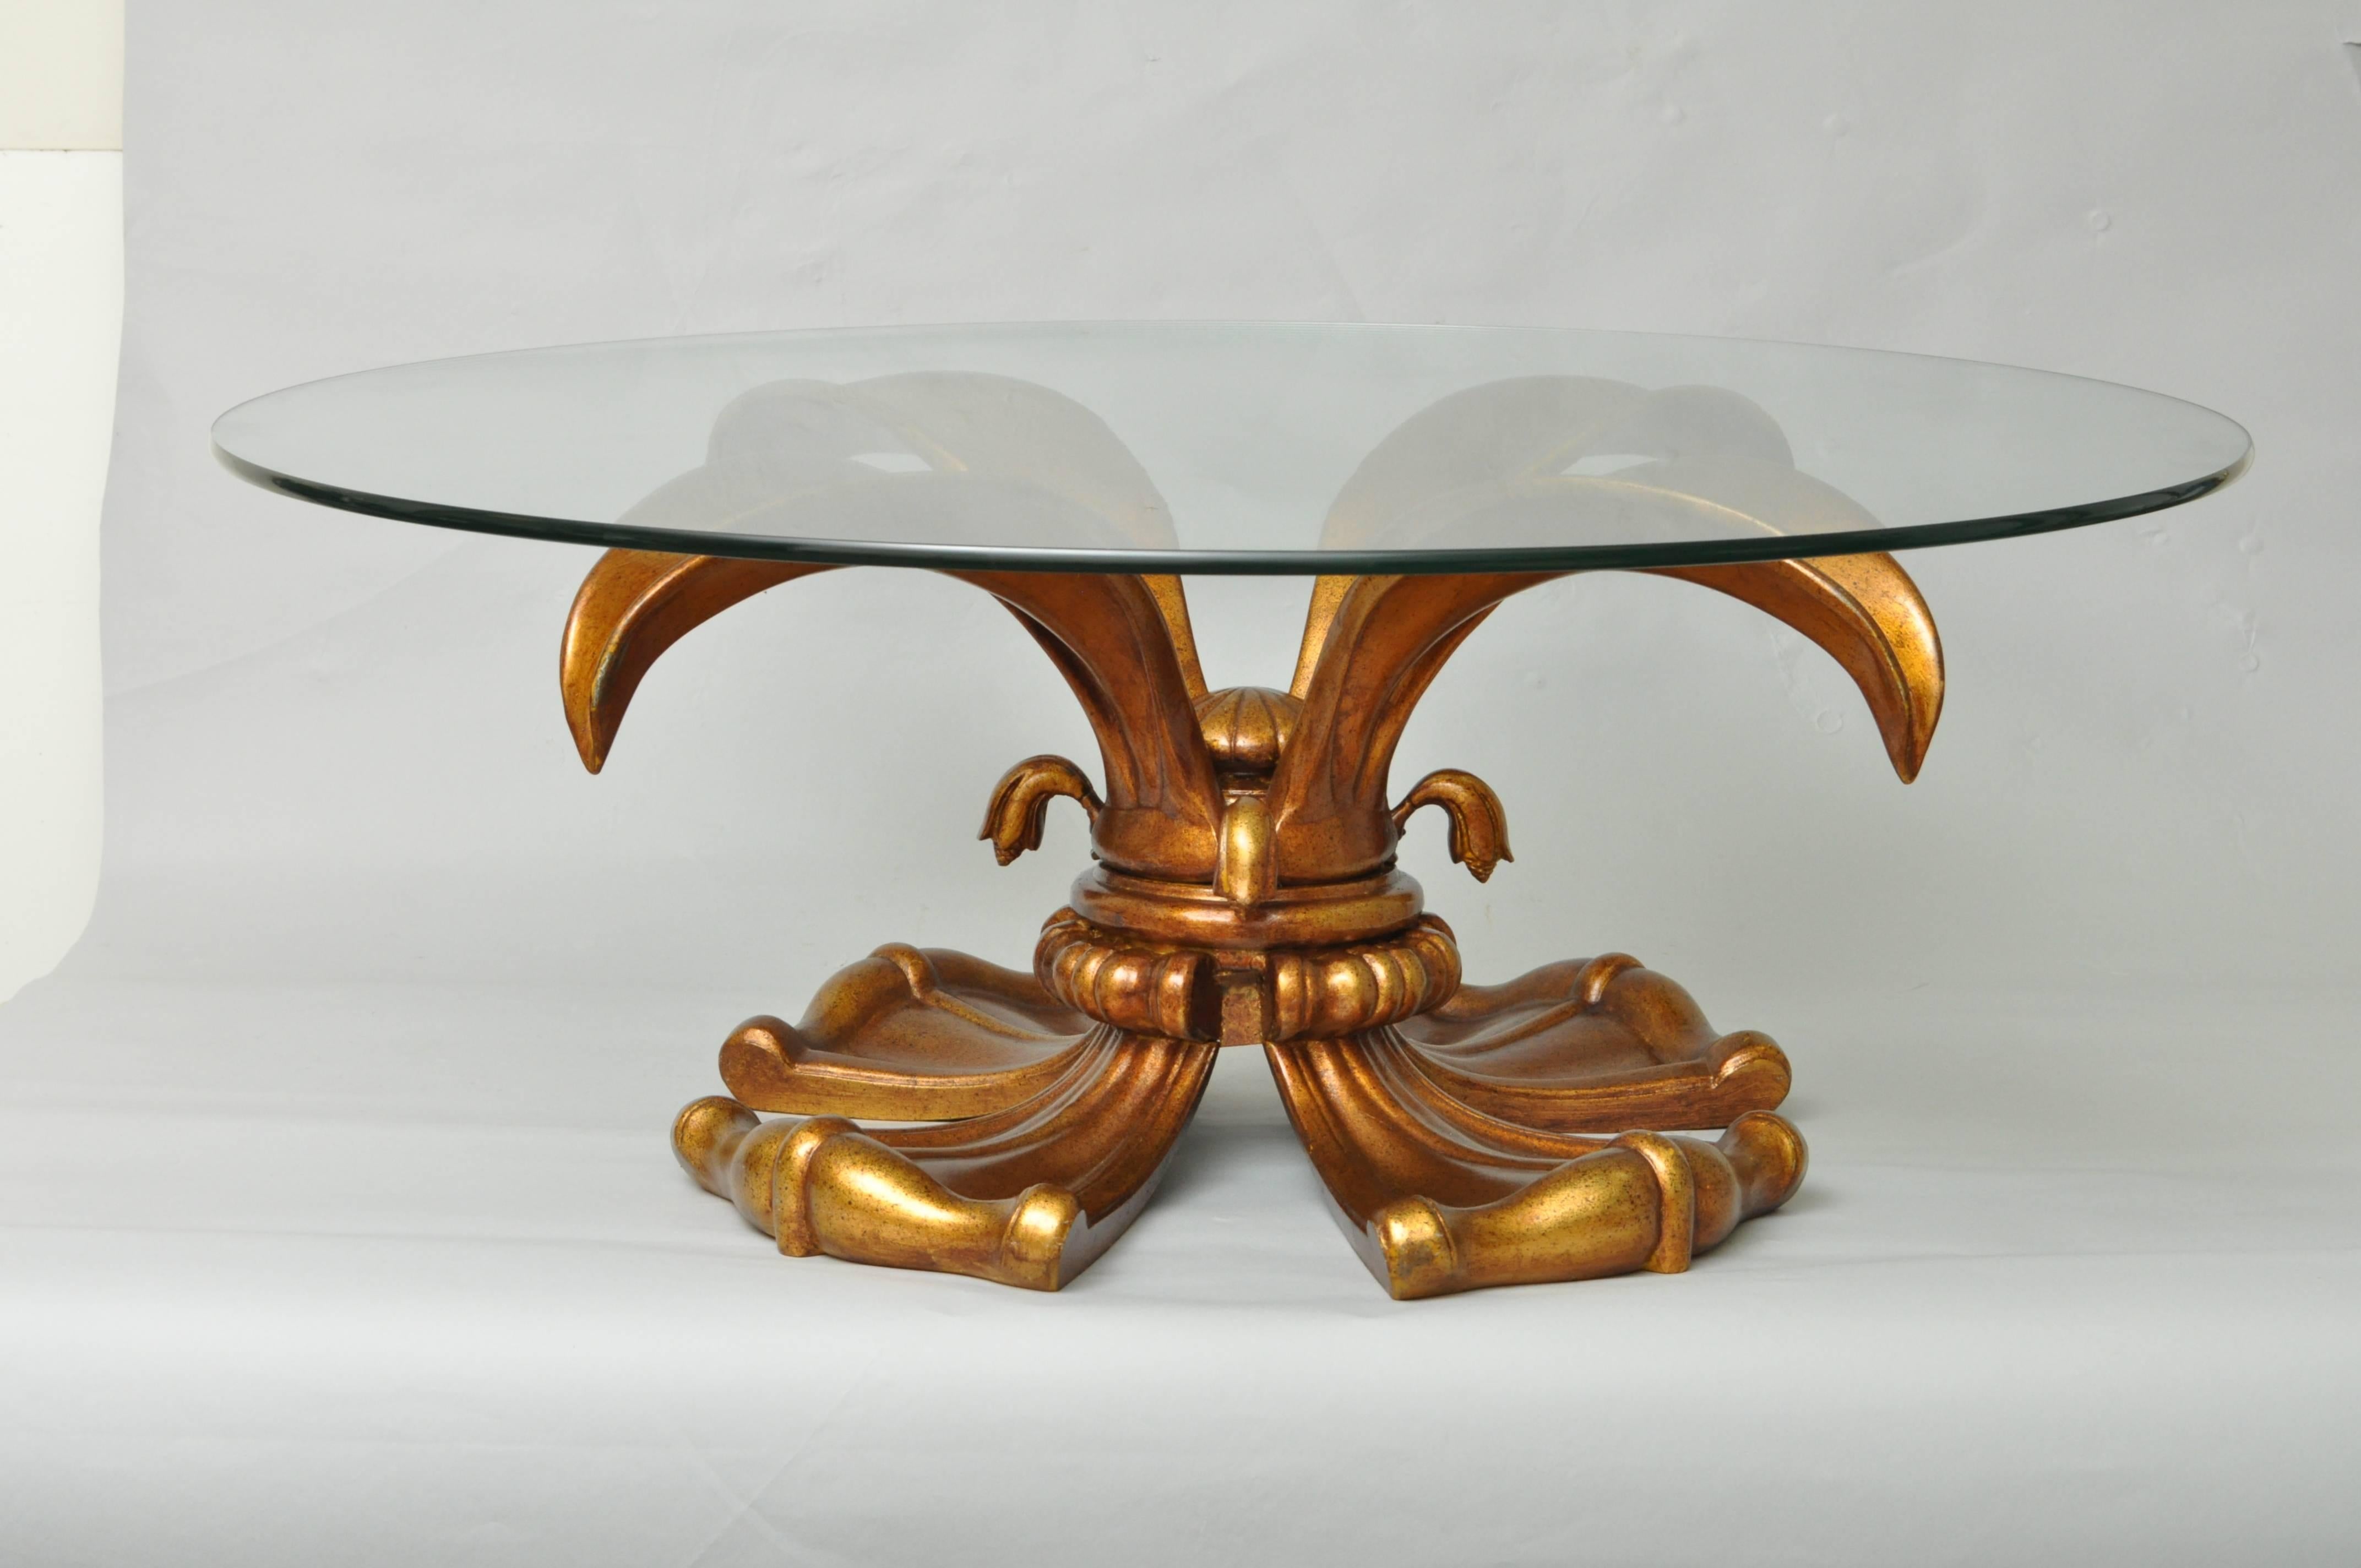 Rare vintage Hollywood Regency gold gilt metal lotus or lily round coffee table attributed to Arthur Court. Item features a 38